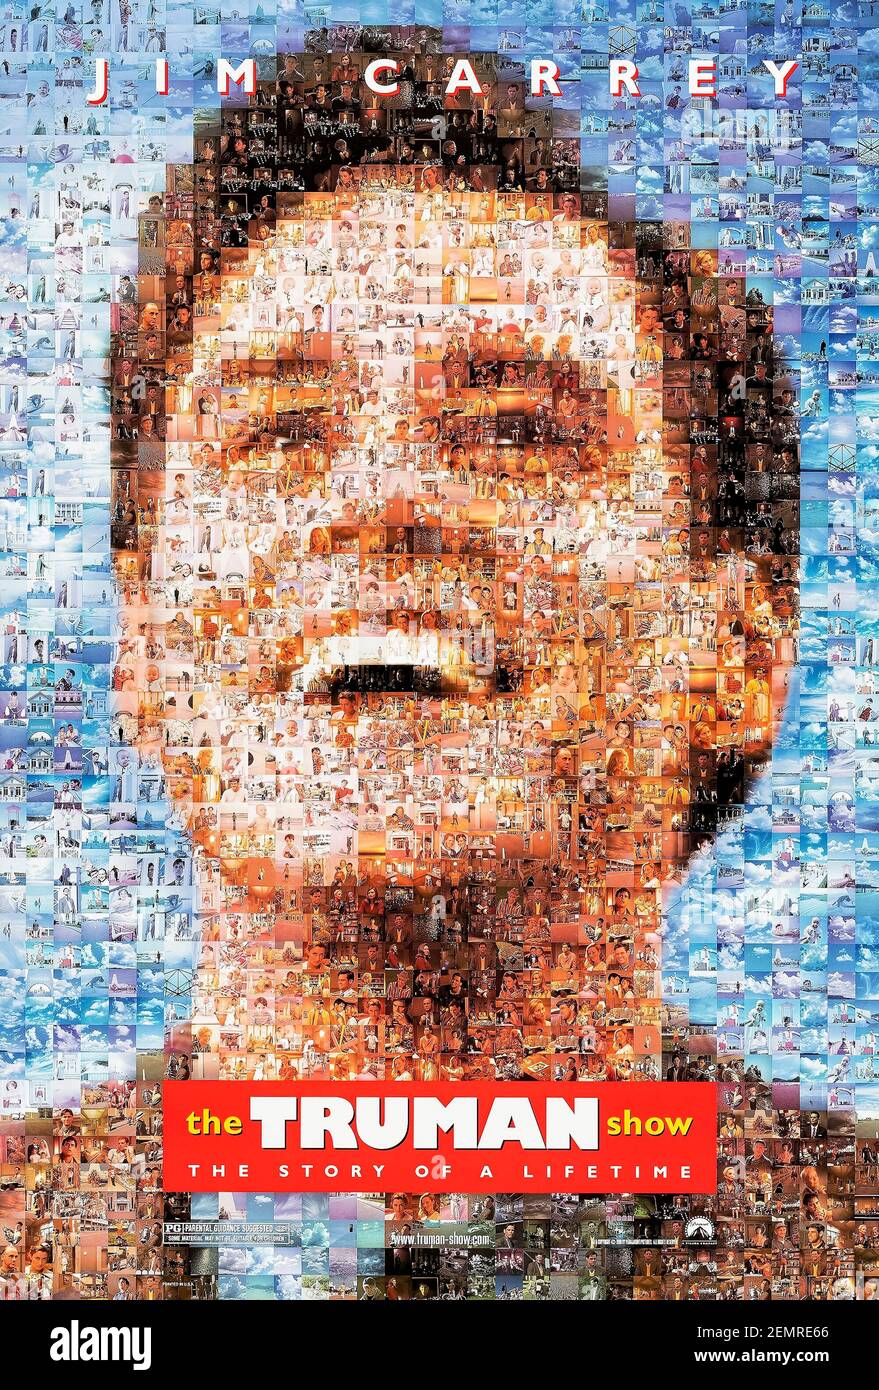 The Truman Show (1998) directed by Peter Weir and starring Jim Carrey, Ed Harris and Laura Linney. Fantastic comedy about an insurance salesman who discovers his whole life is being filmed as a reality TV show. Stock Photo